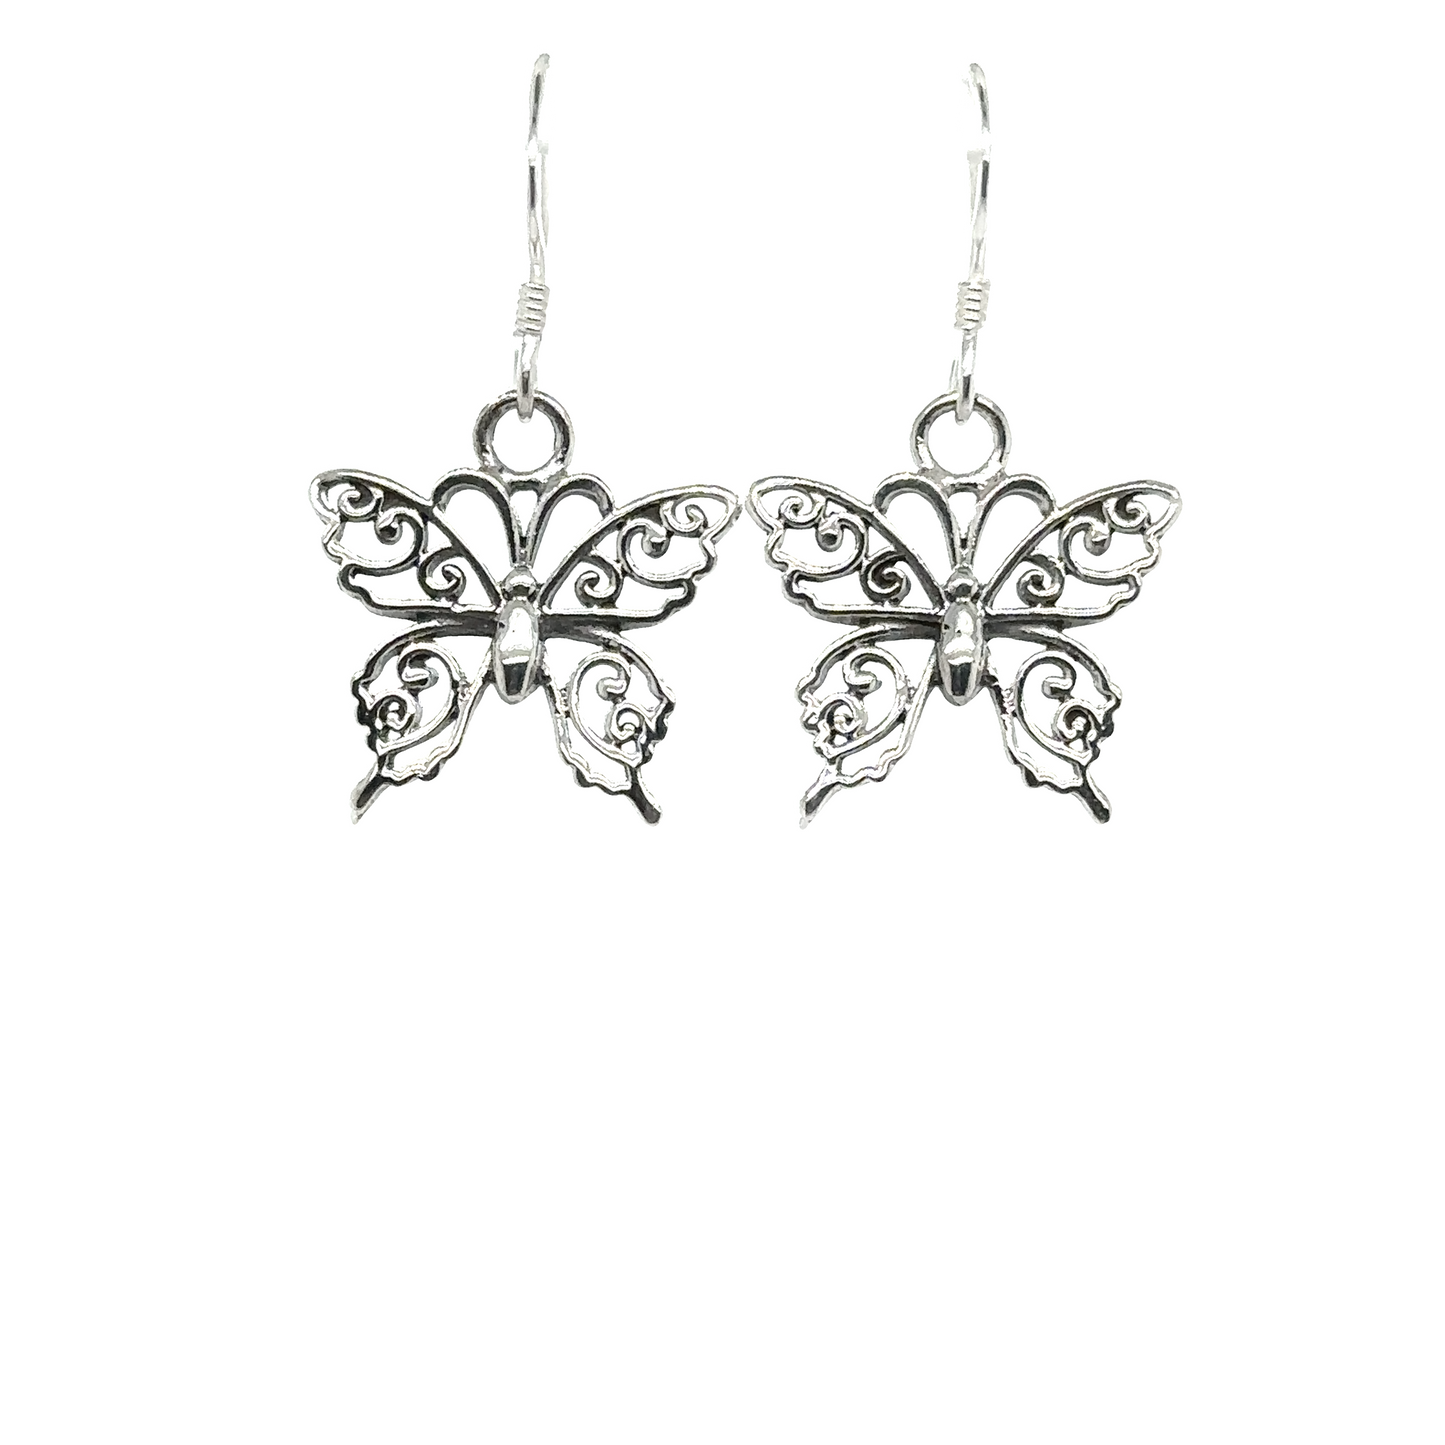 These stunning Super Silver Small Filigree Butterfly Earrings feature a delicate filigree design, crafted with exquisite detail in .925 silver. The elegant silver butterflies stand out beautifully against the clean white background.